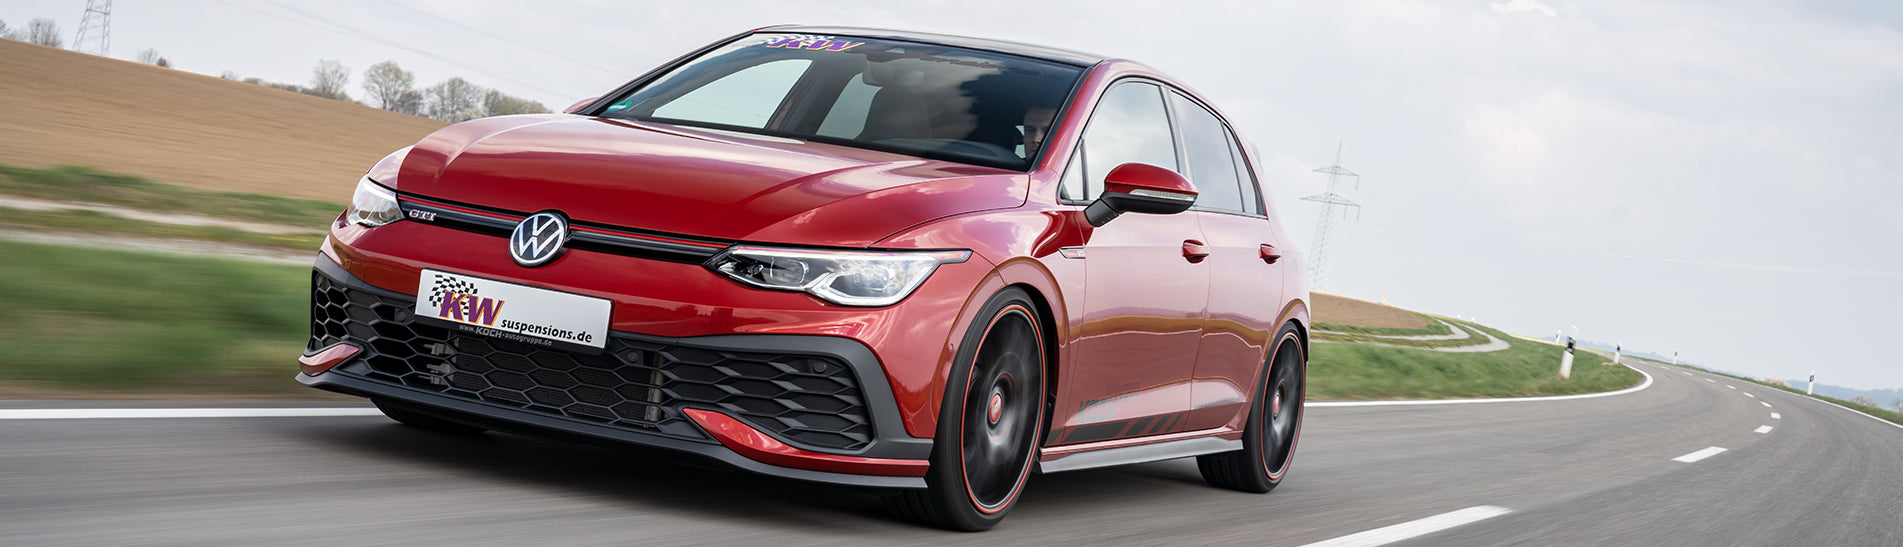 KW & ST suspension kits are now available for the VW Golf Mk8 GTI